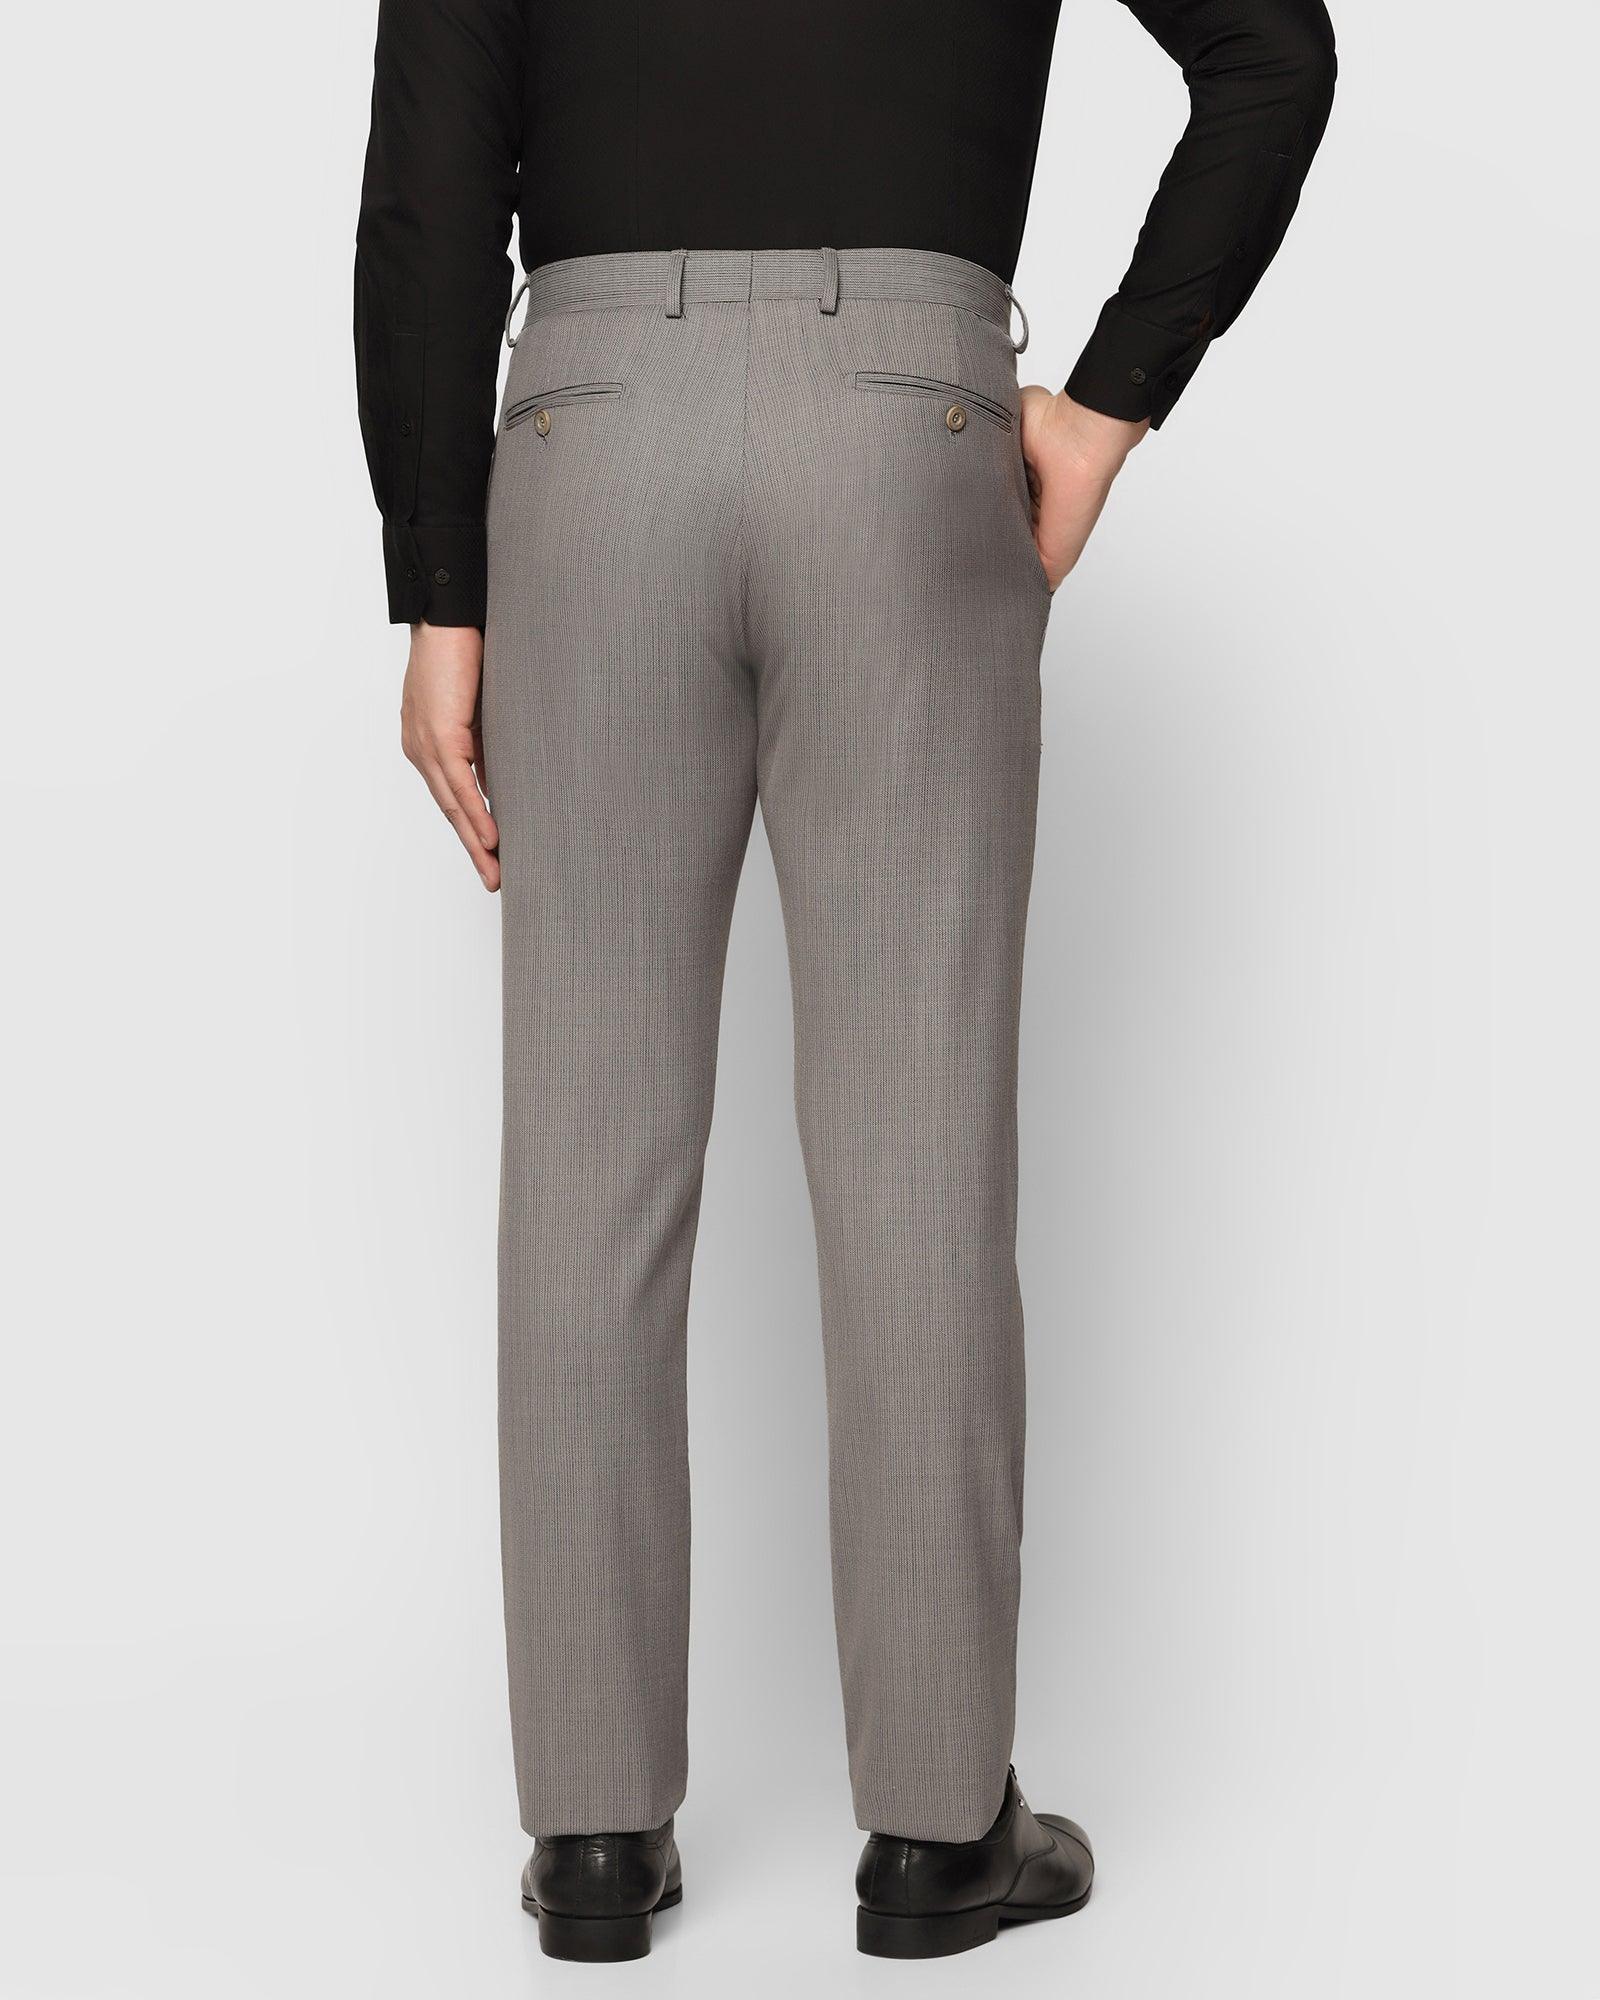 Buy Black Slim Fit Premium Laundered Stretch Chinos Trousers from Next USA